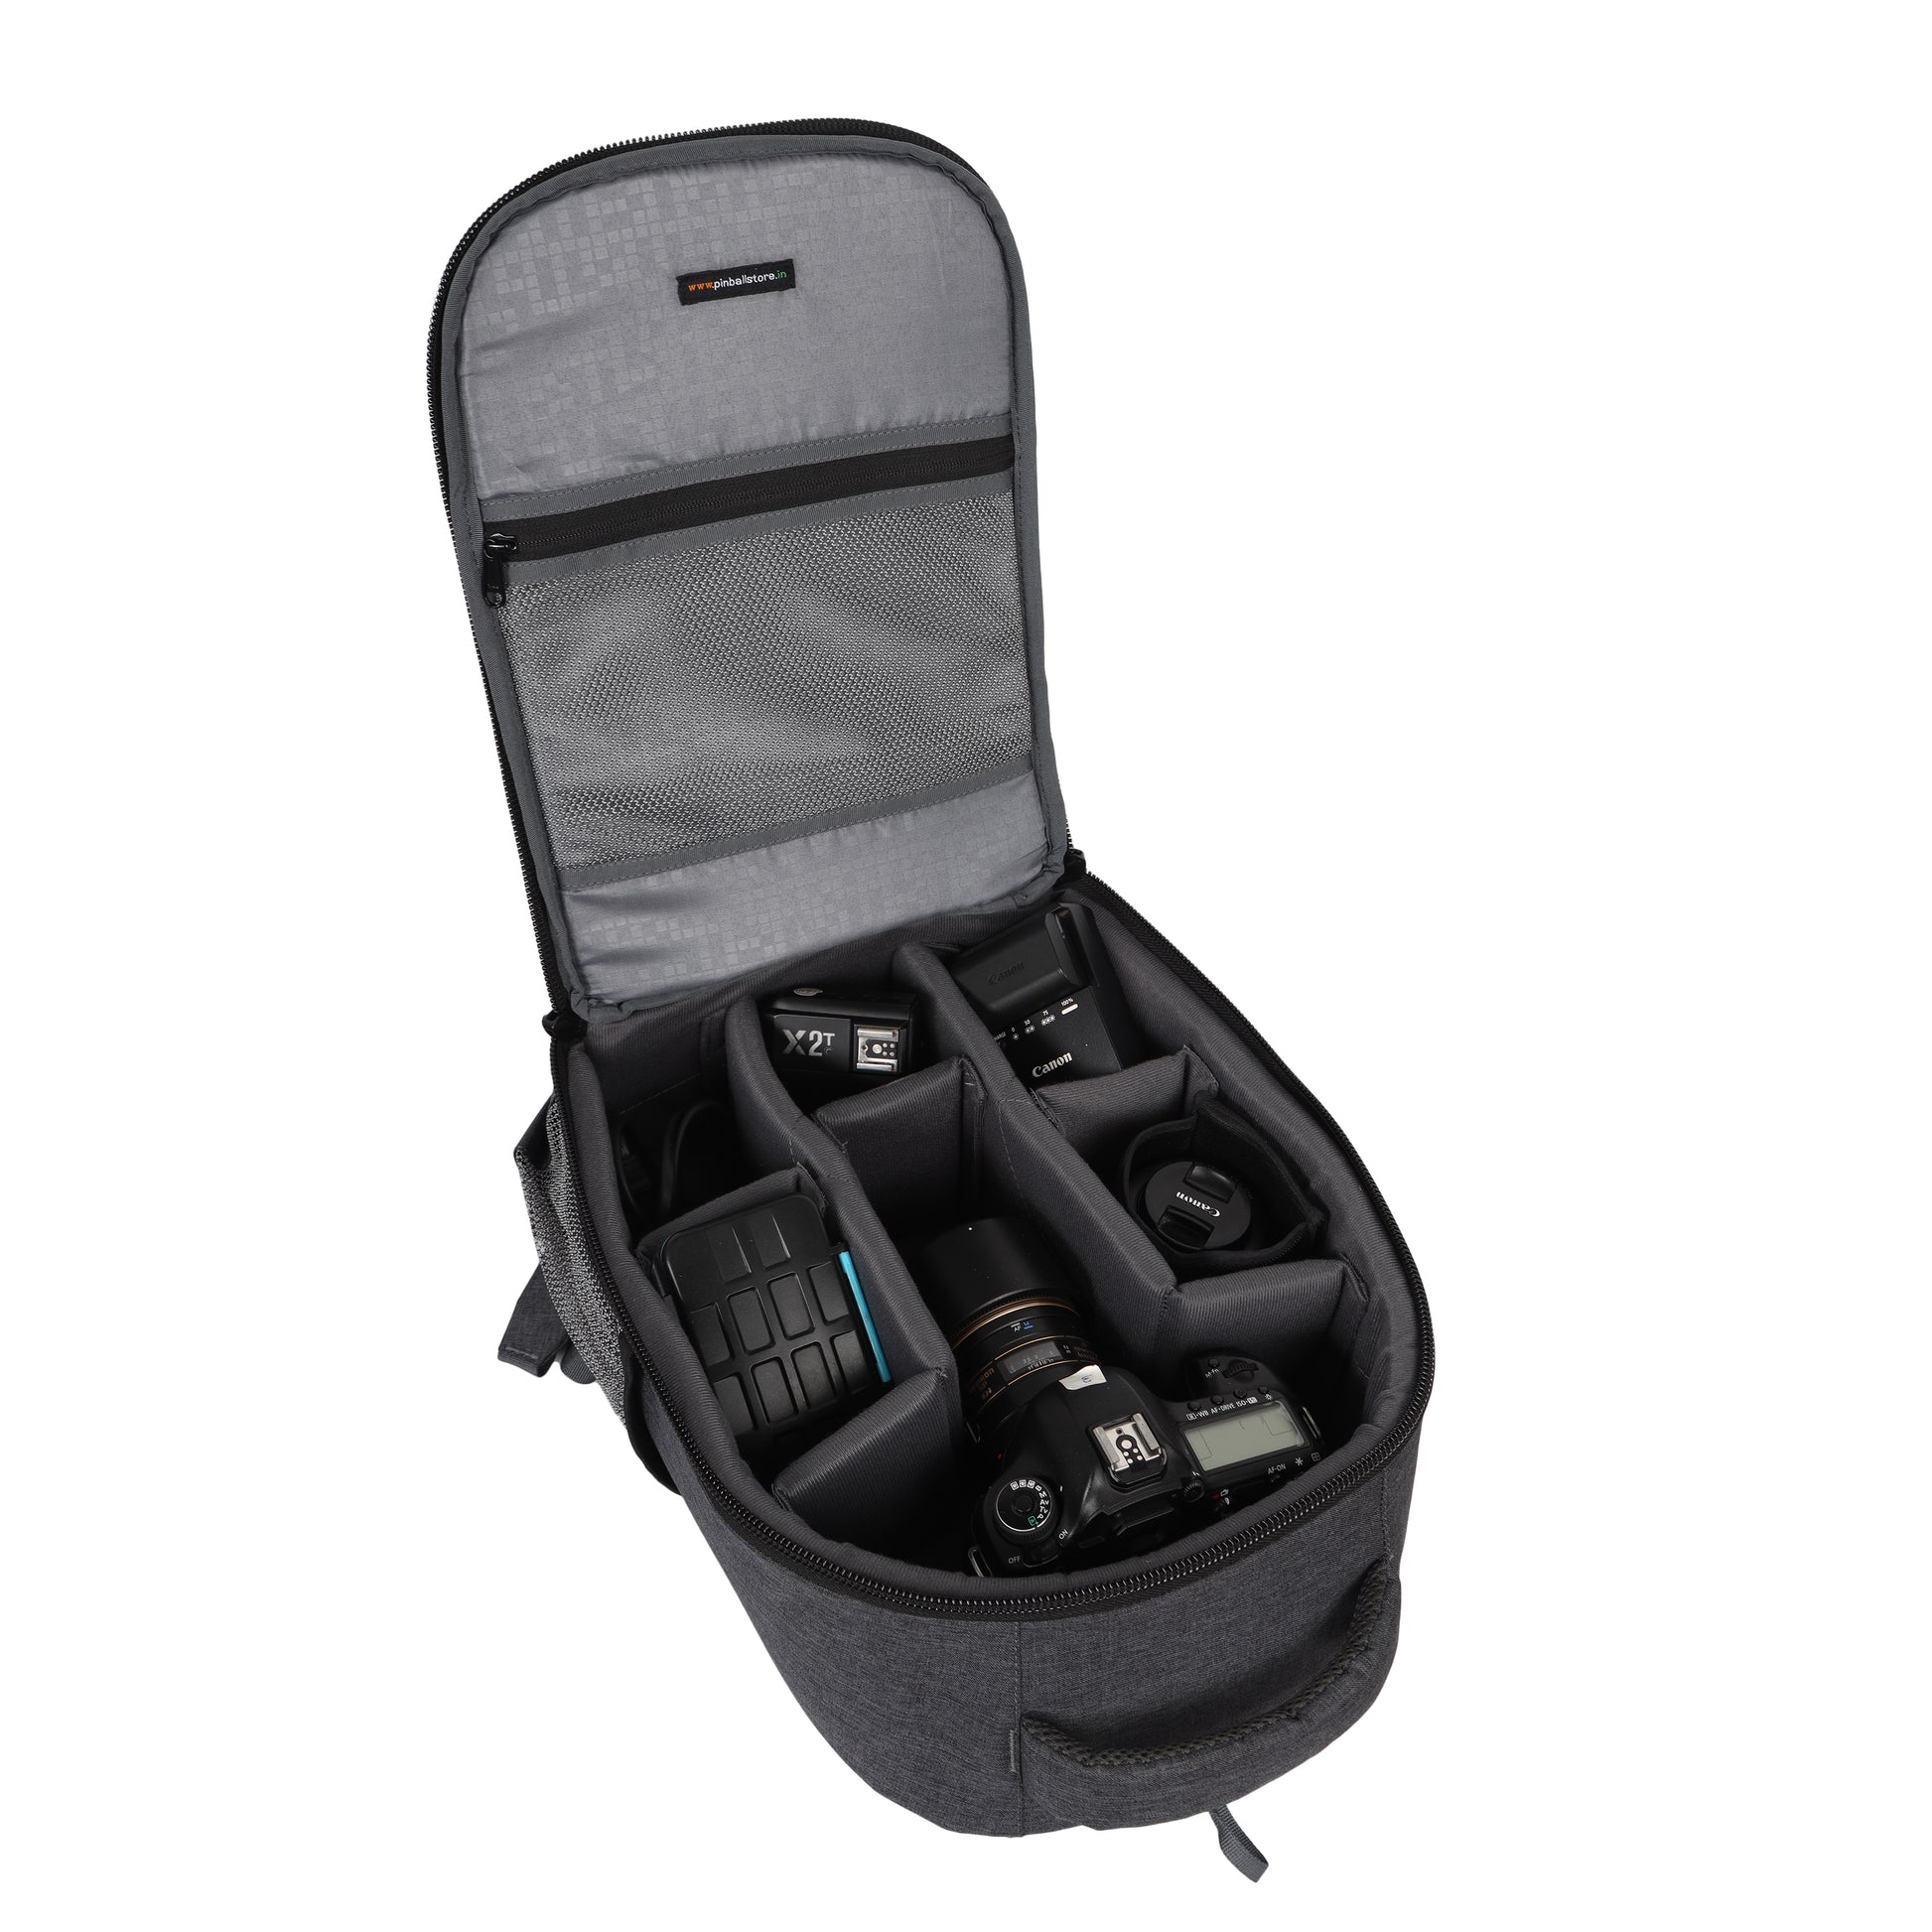 Image: Top view of the open P67 Rage DSLR camera bag, showcasing its spacious interior without any equipment. The bag provides plenty of room for organizing and storing your camera gear and accessories, ensuring everything is within easy reach. Stay prepared and organized with the P67 Rage.